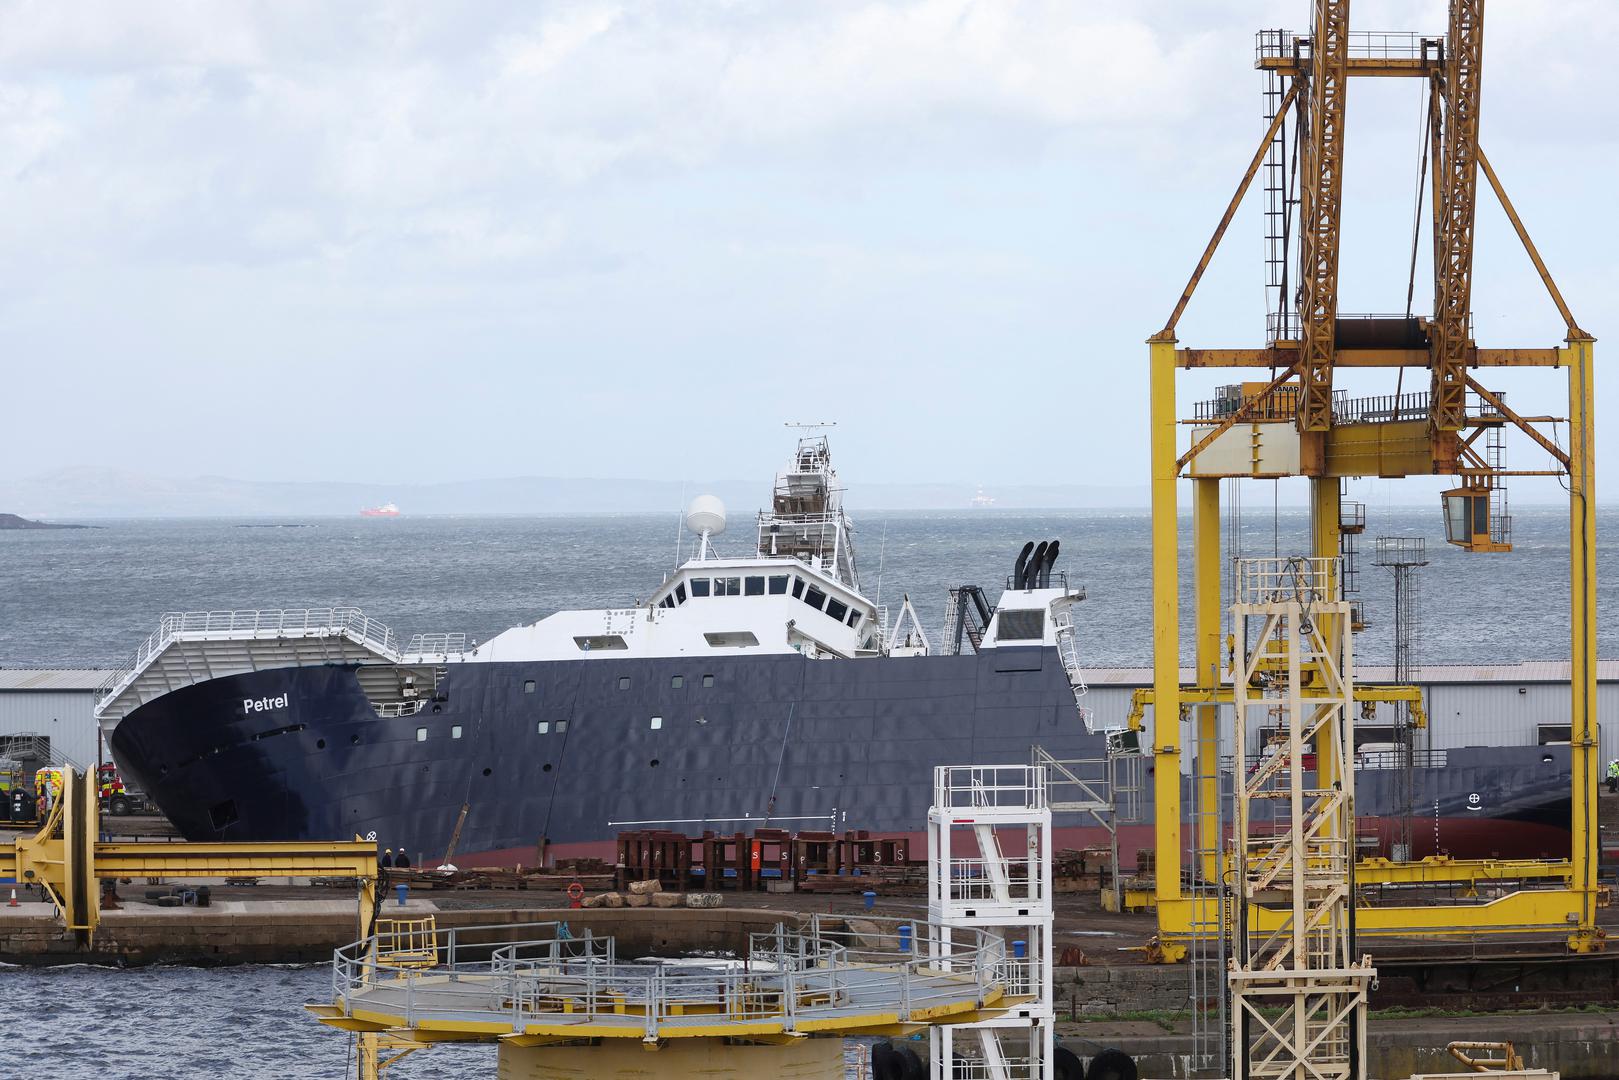 View of the research vessel Petrel after it tipped on its side in a dry dock in Leith, near Edinburgh, Scotland, Britain, March 22, 2023. REUTERS/Russell Cheyne Photo: RUSSELL CHEYNE/REUTERS